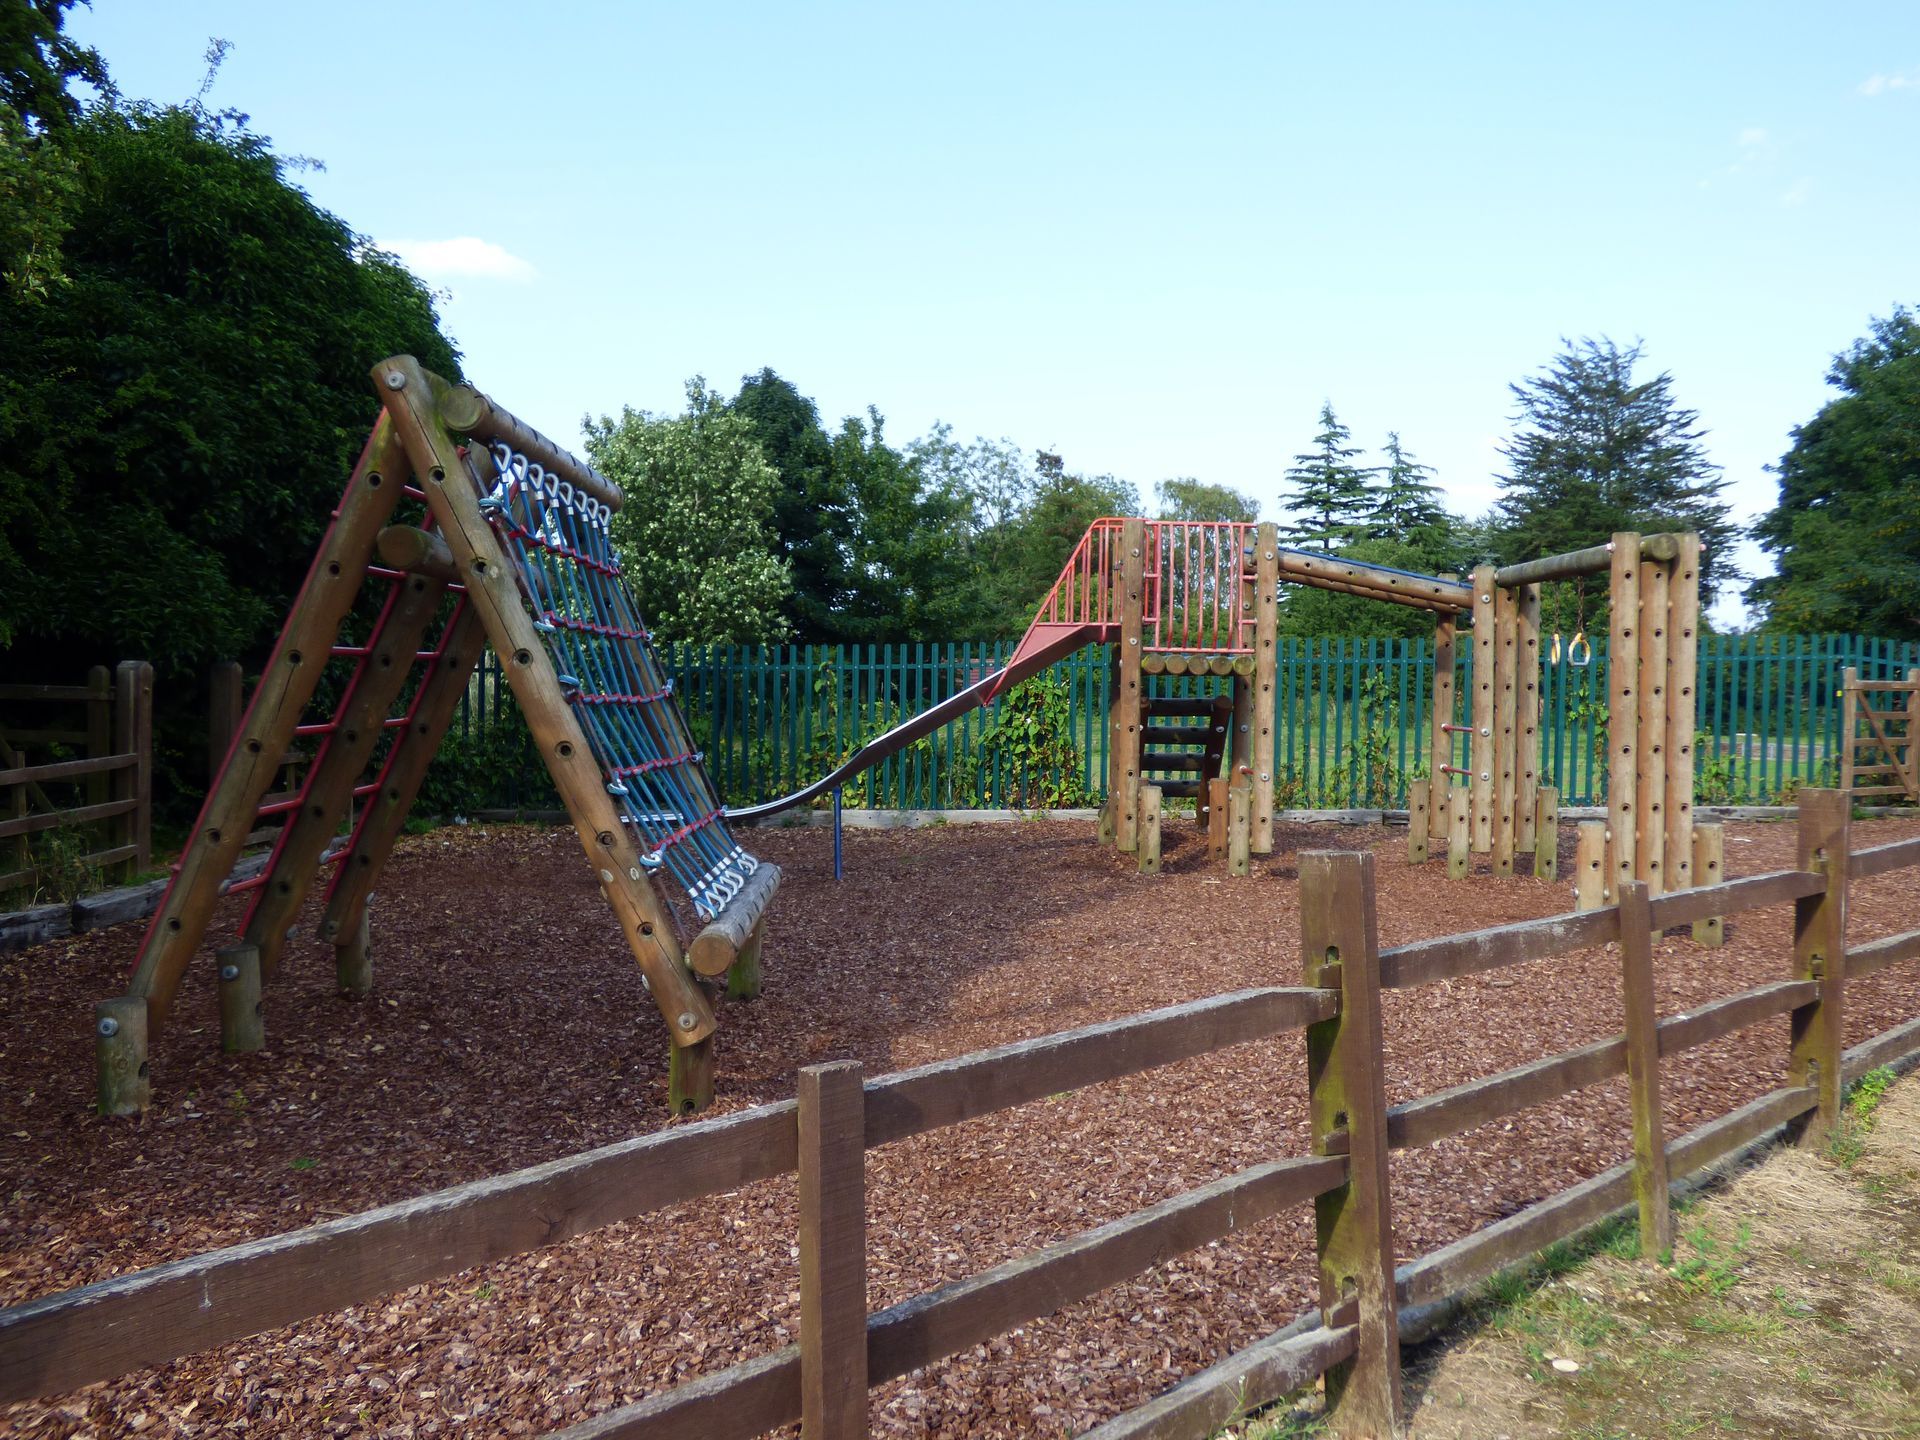 A wooden playground with a wooden fence surrounding it